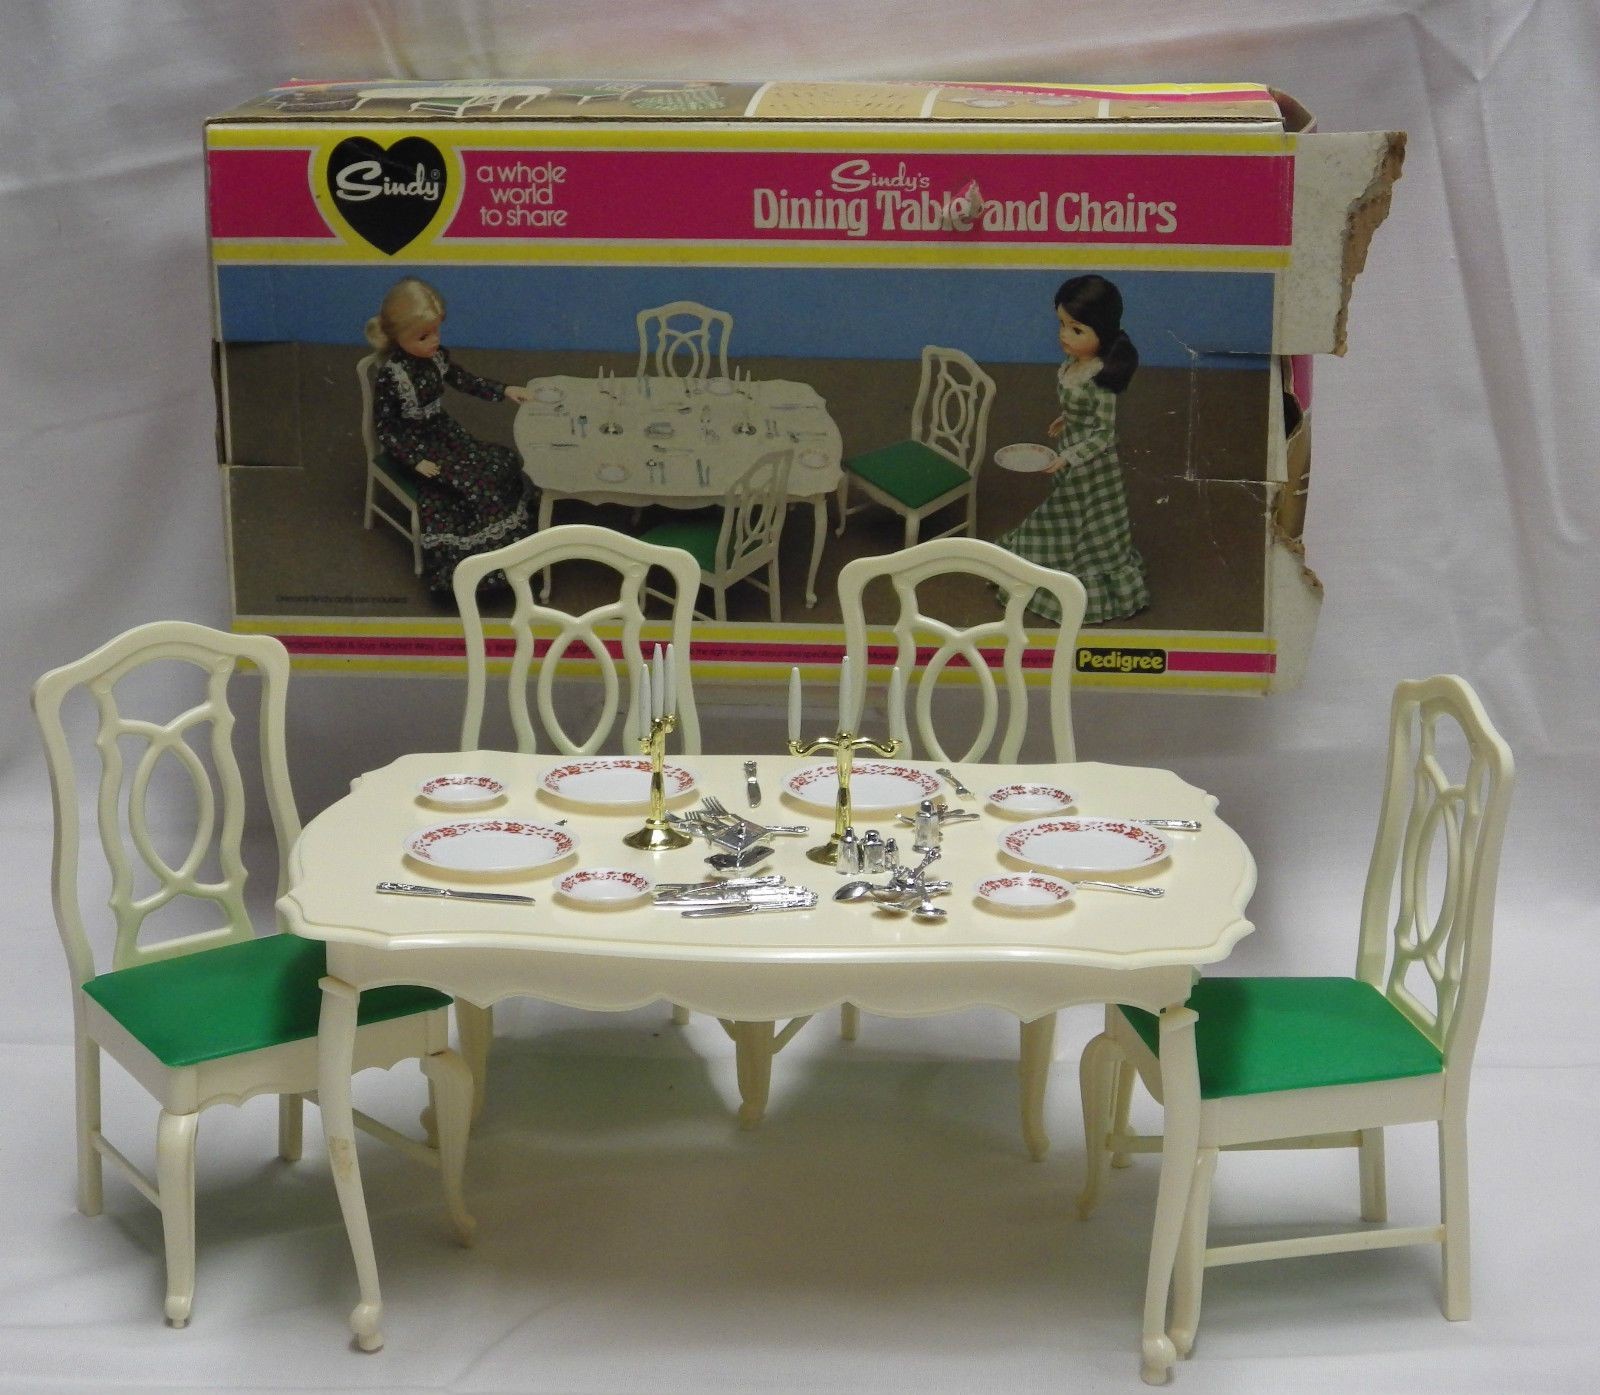 Papercraft Chair Vintage 60s 70s Sindy Dining Table and Chairs W Accessories Boxed